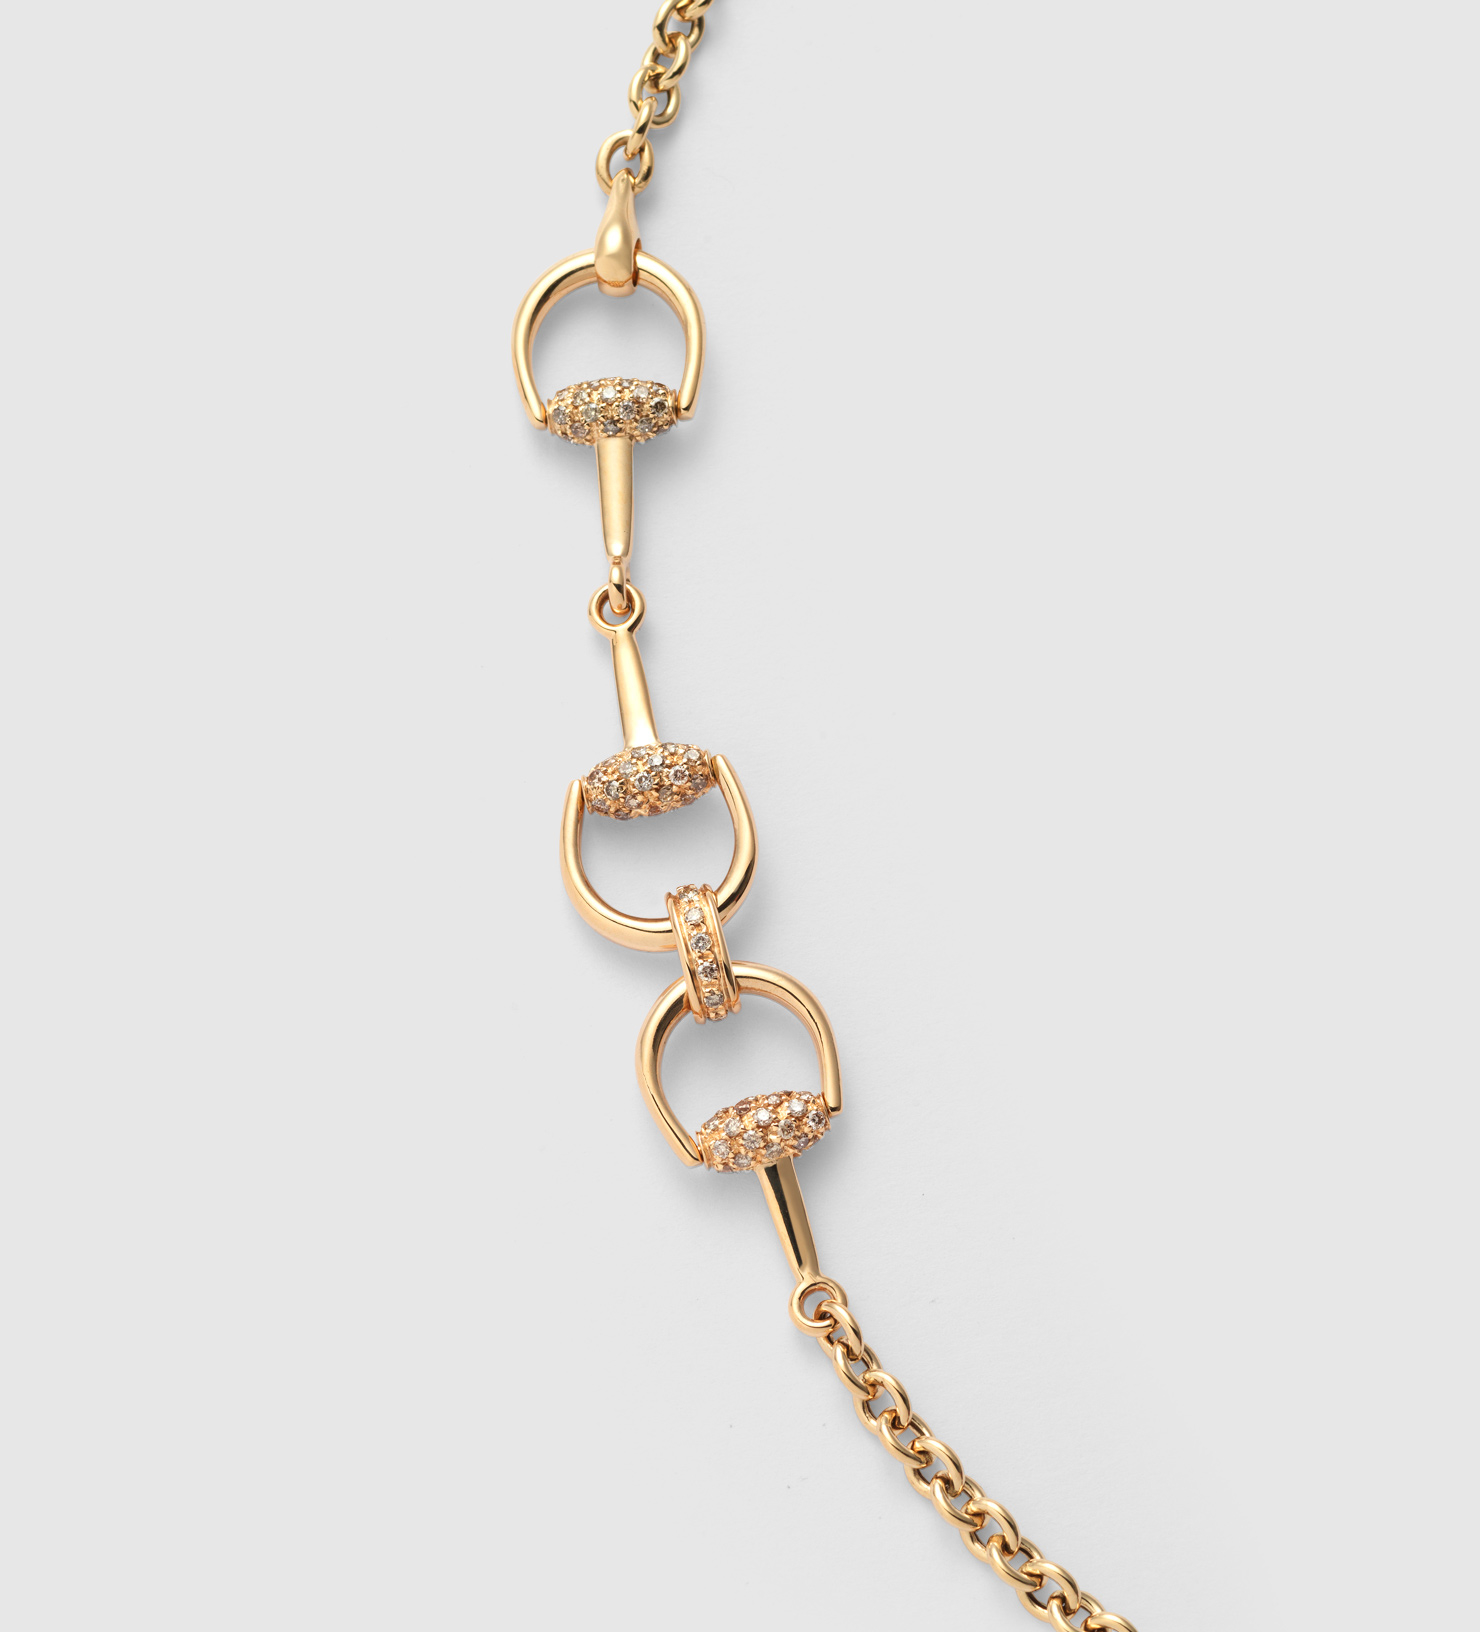 Lyst - Gucci Gold And Diamond Horsebit Necklace in Metallic